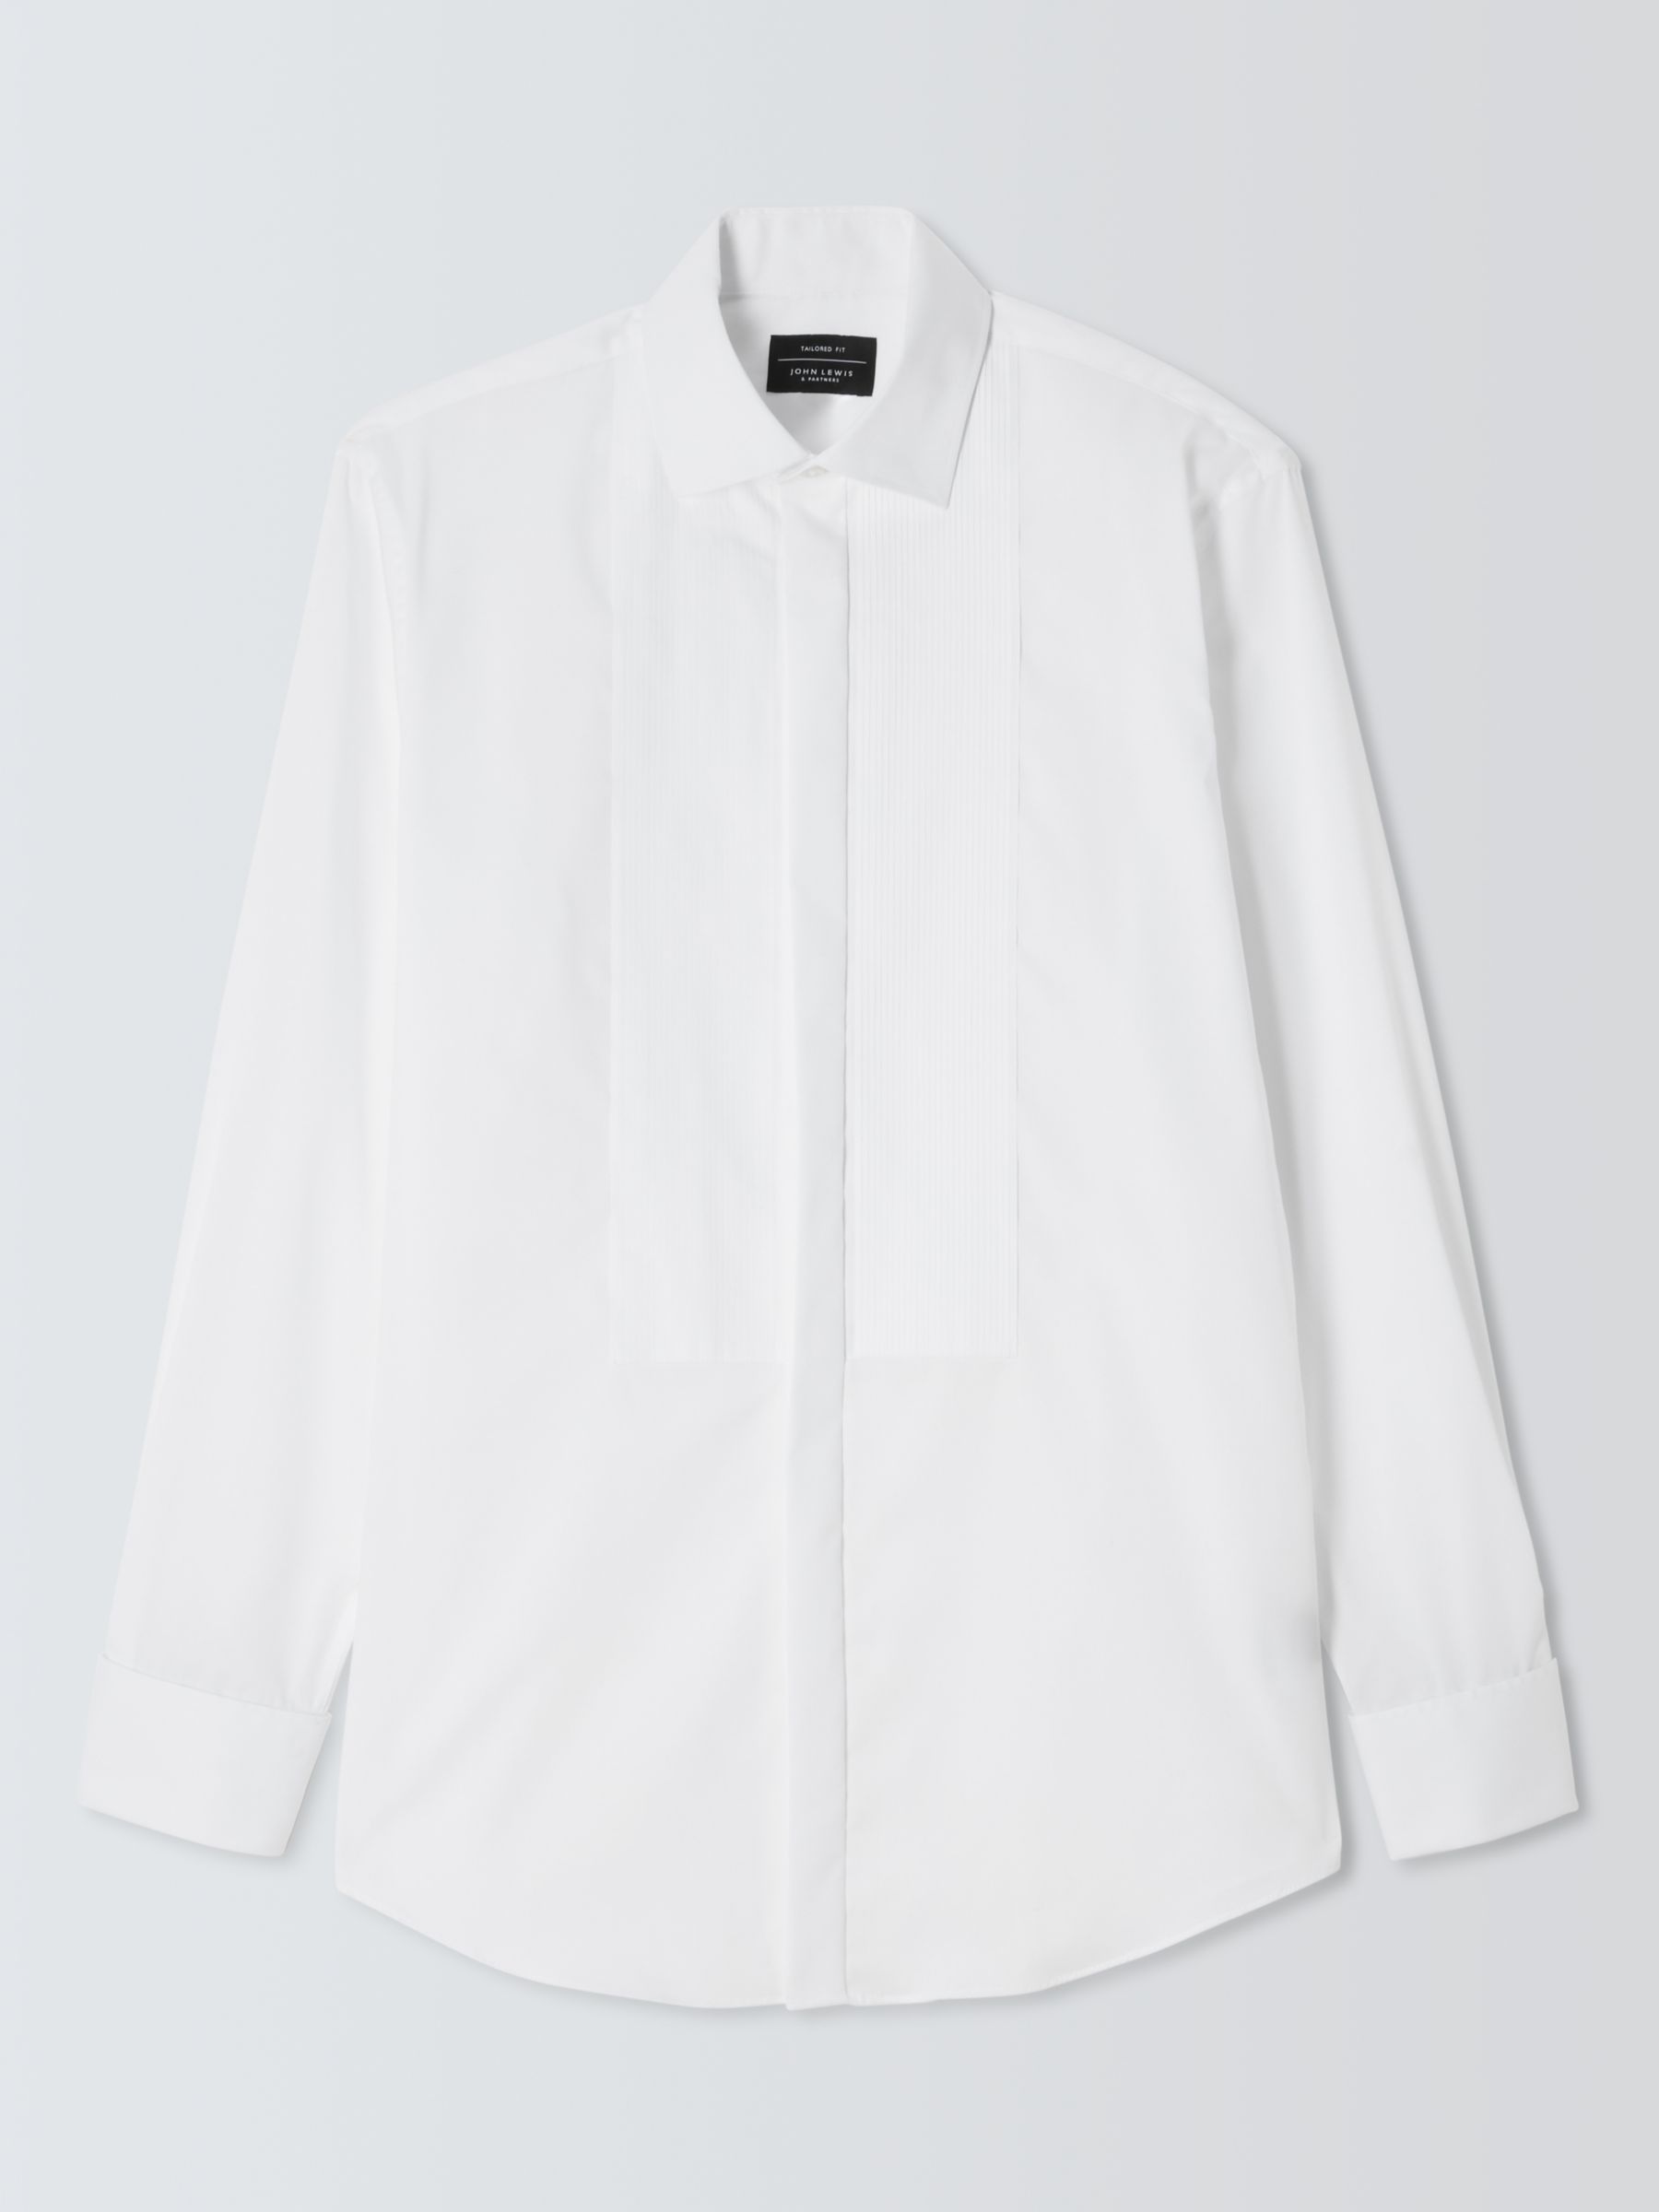 Buy John Lewis Pleated Point Collar Tailored Fit Dress Shirt, White Online at johnlewis.com